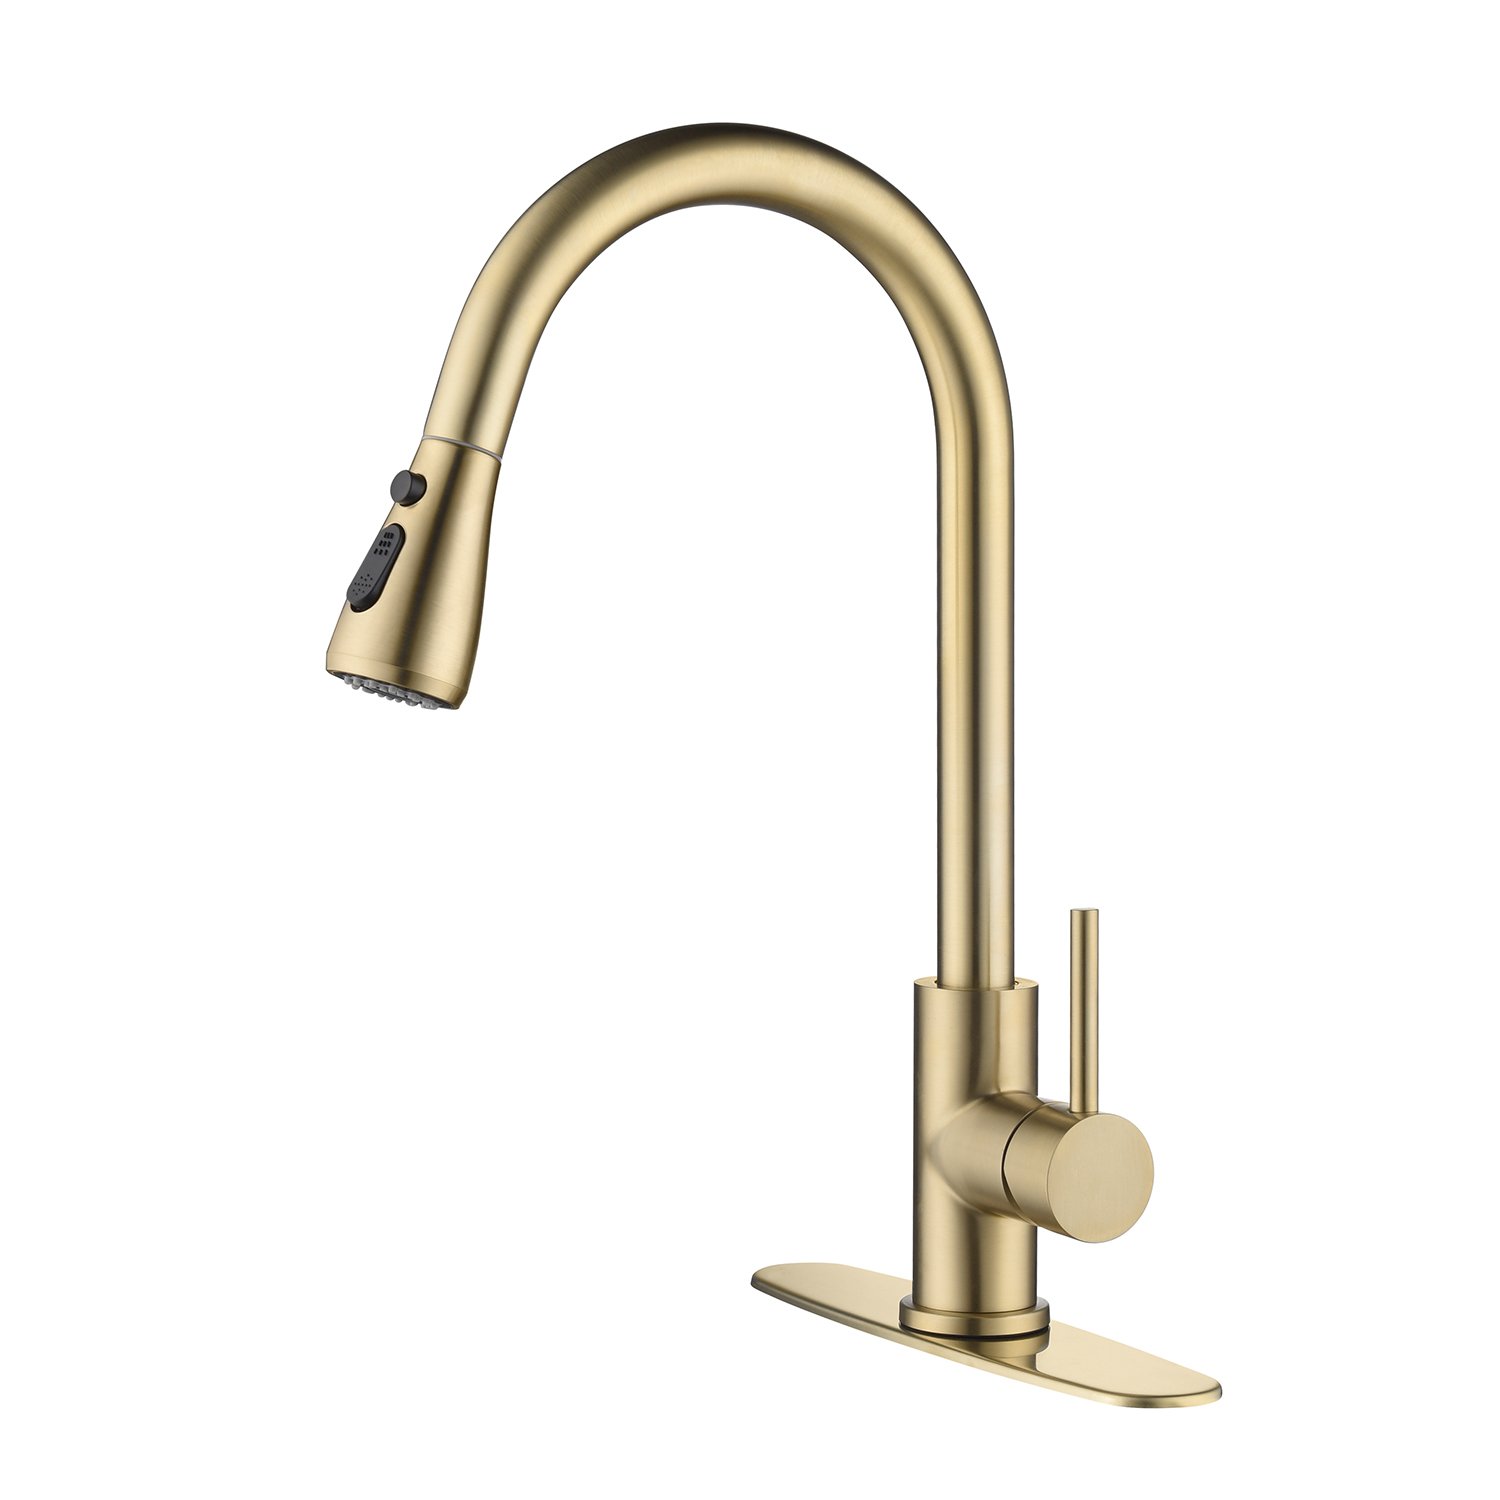 CASAINC Kitchen Faucet with Pull Out Sprayer in Brushed Gold-CASAINC